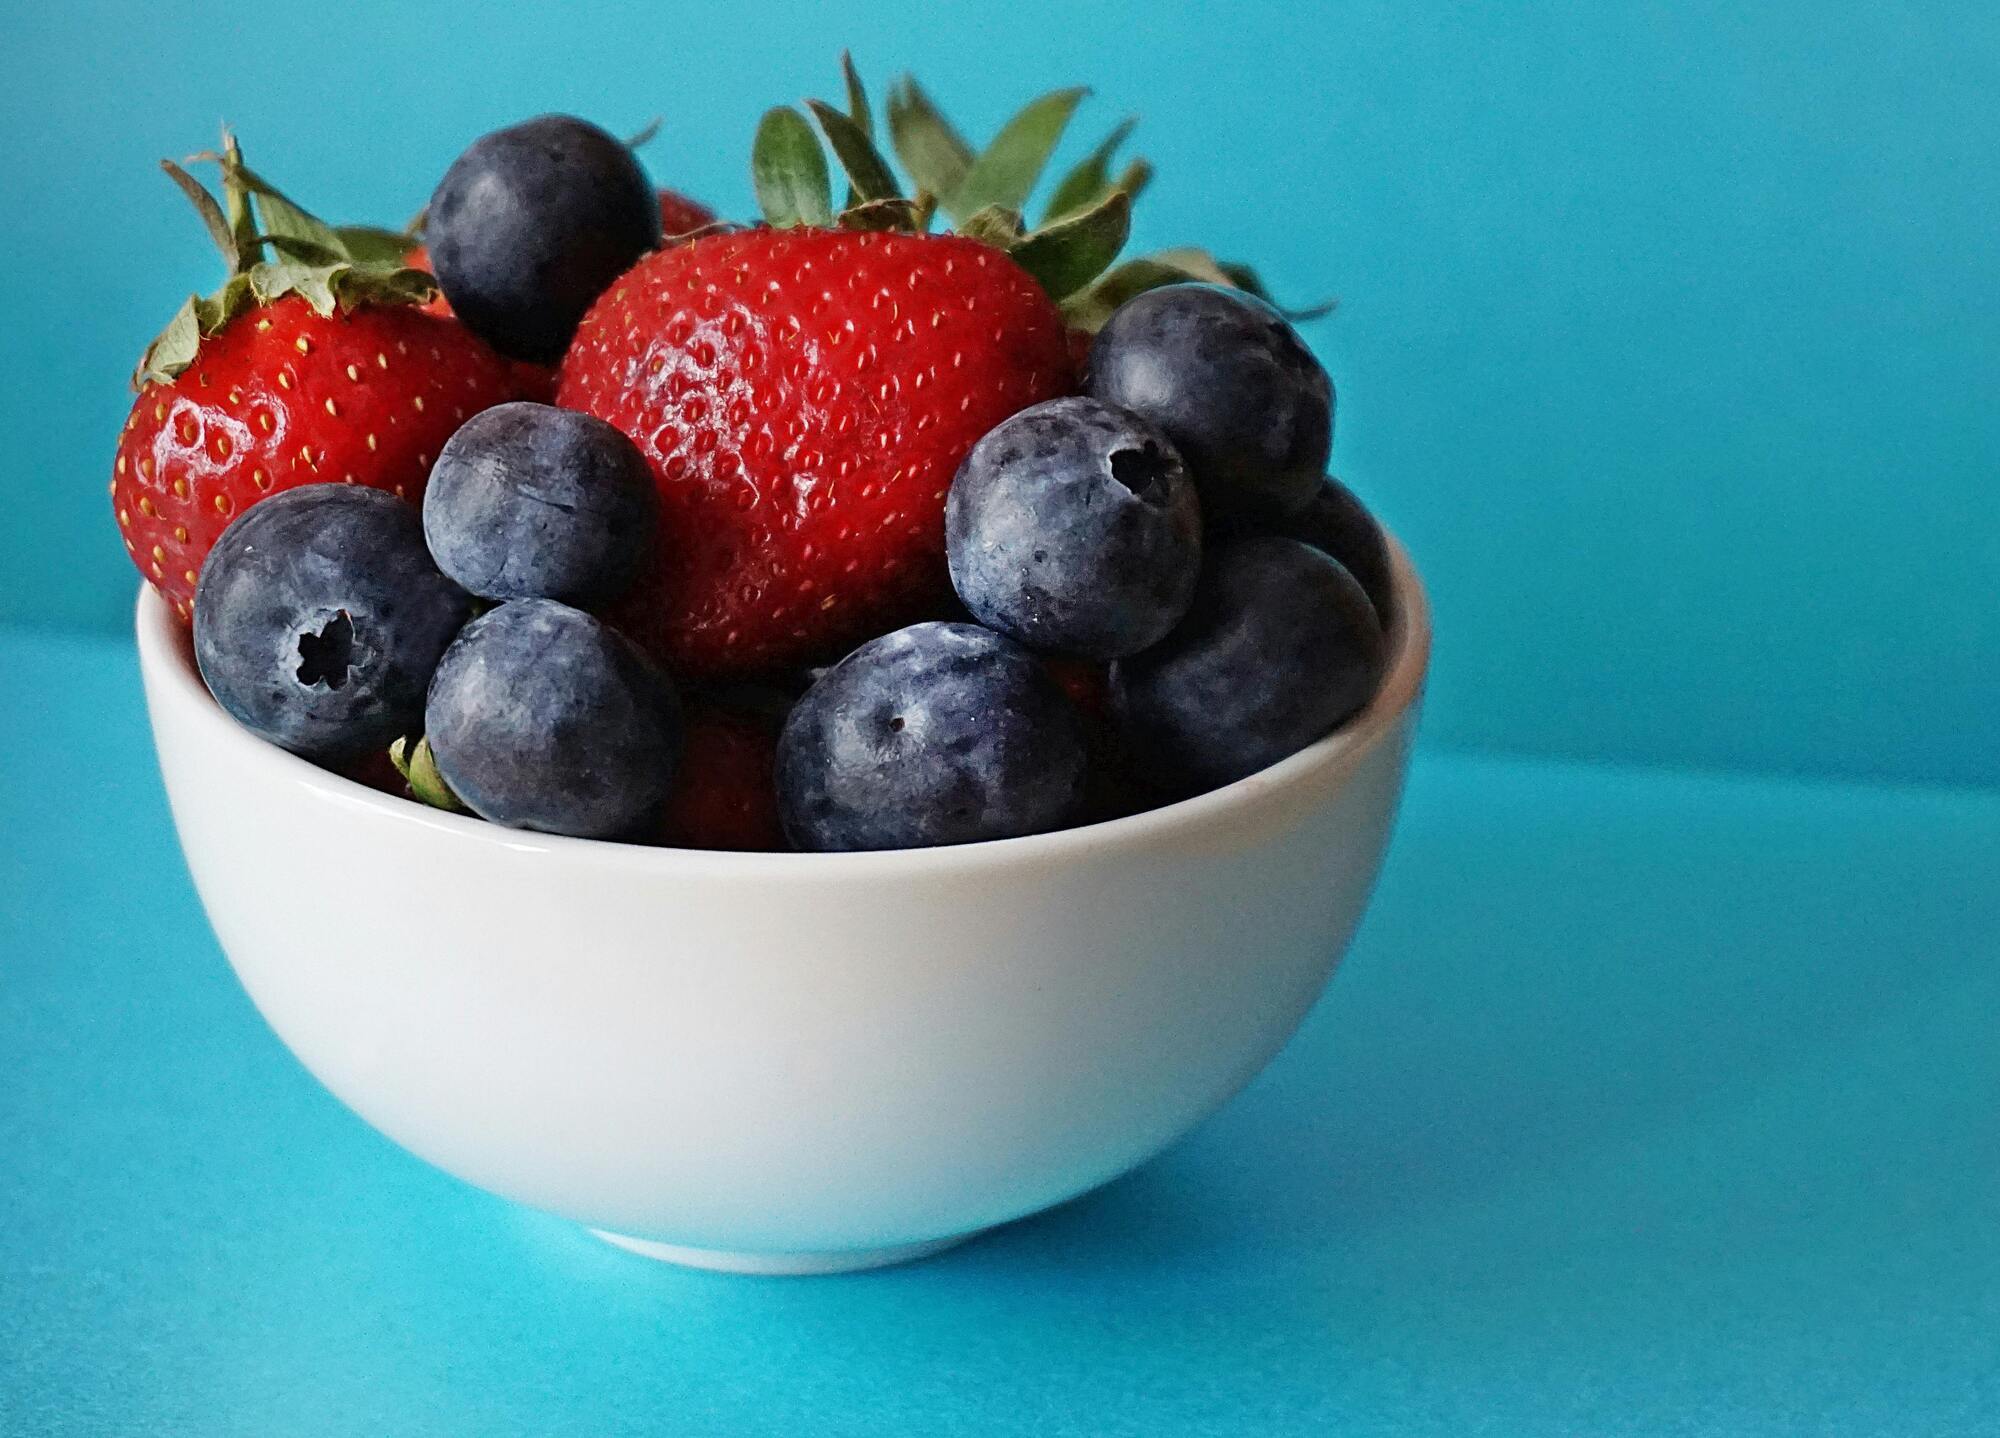 How to wash berries properly and why use baking soda